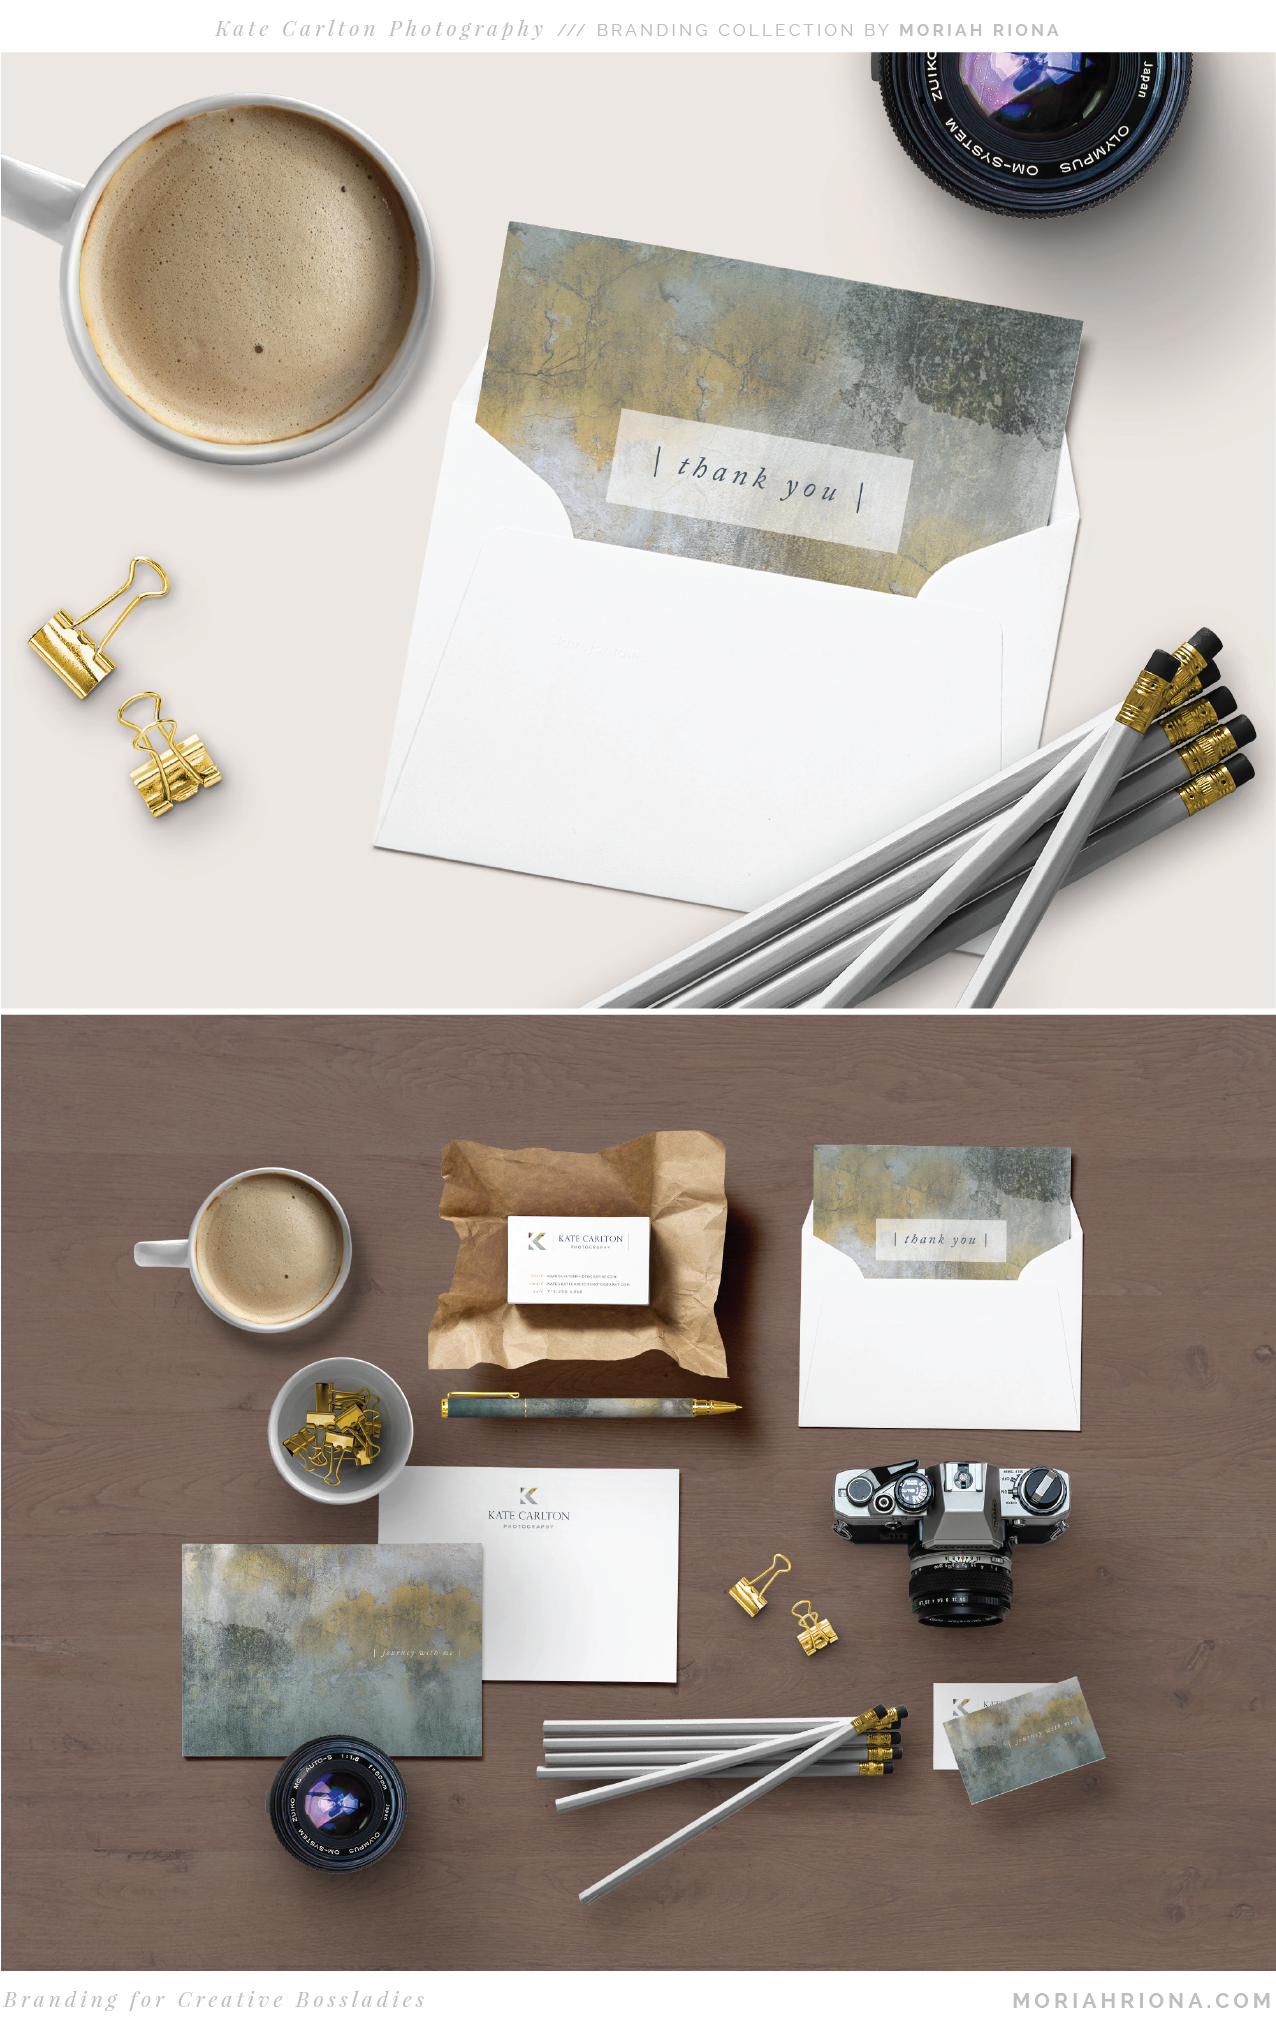 Elegant and sophisticated branding for Colorado Springs photographer, Kate Carlton Photography, by Moriah Riona. Inspired by classical paintings and artwork and reminiscent of Spanish museums. Brand stationery with custom business cards, note cards, thank you cards and stickers. Includes unique brand pattern, logo, submark and tagline. Designs by Denver graphic designer, Moriah Riona. Now booking -- branding for photographers!